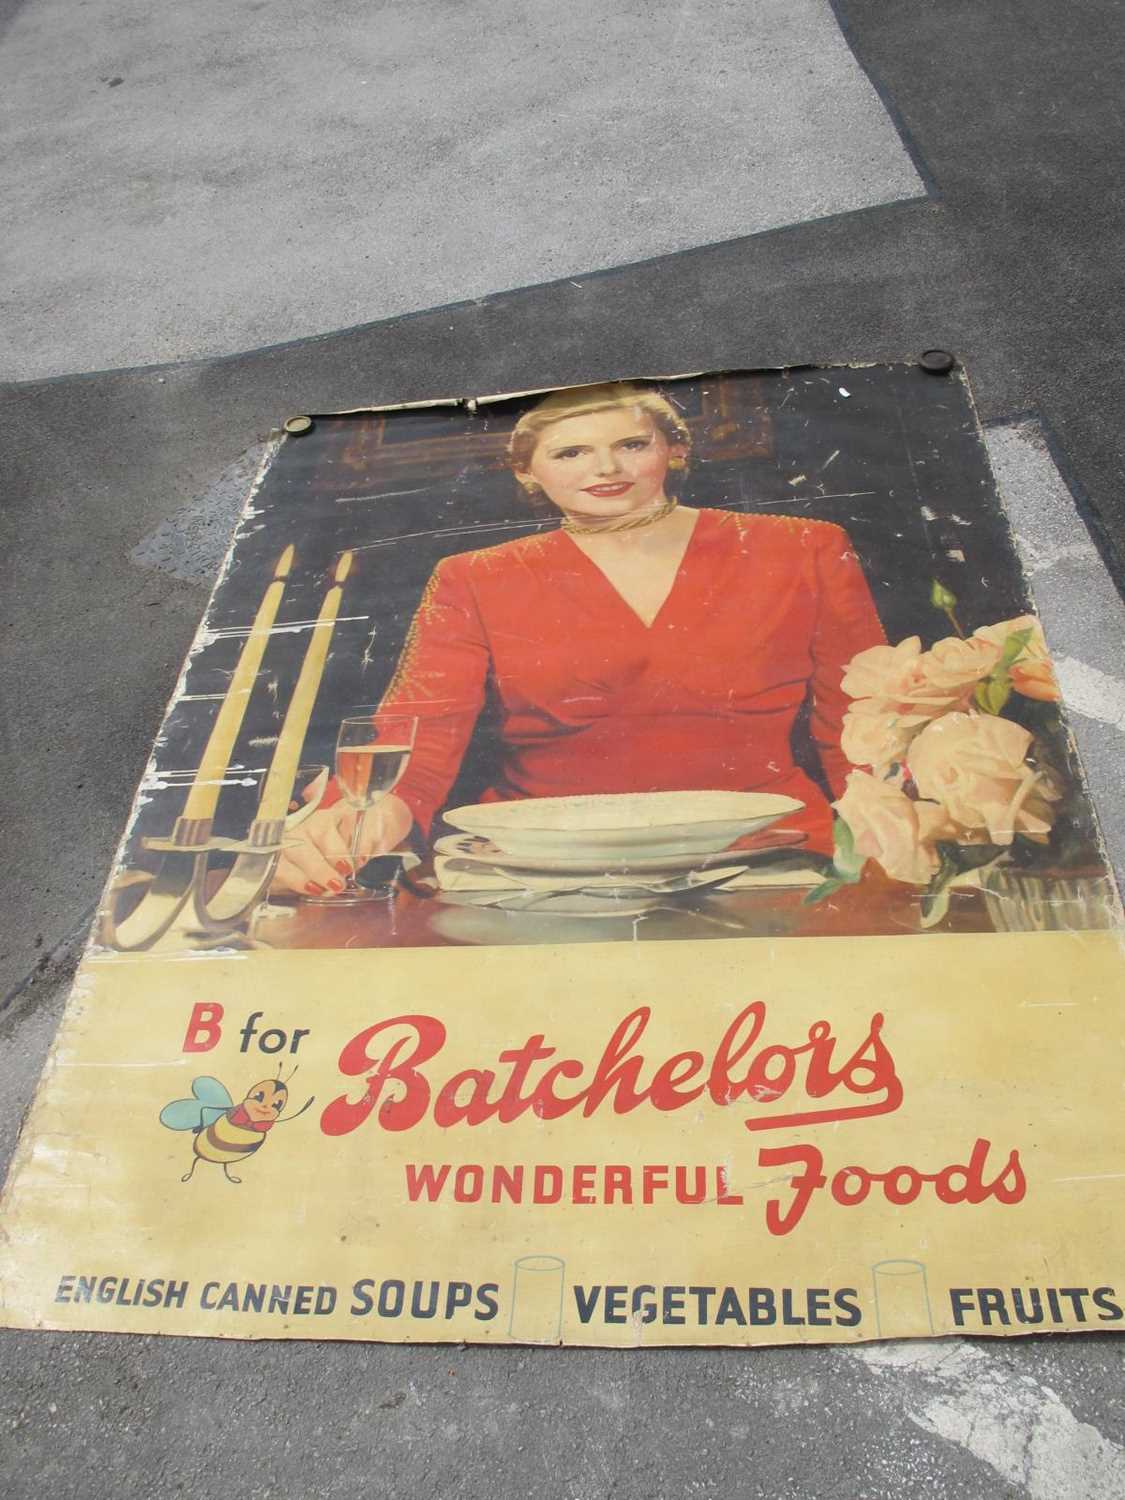 Vintage Advertising; Batchelors Poster, circa mid XX Century, featuring glamorous lady in red